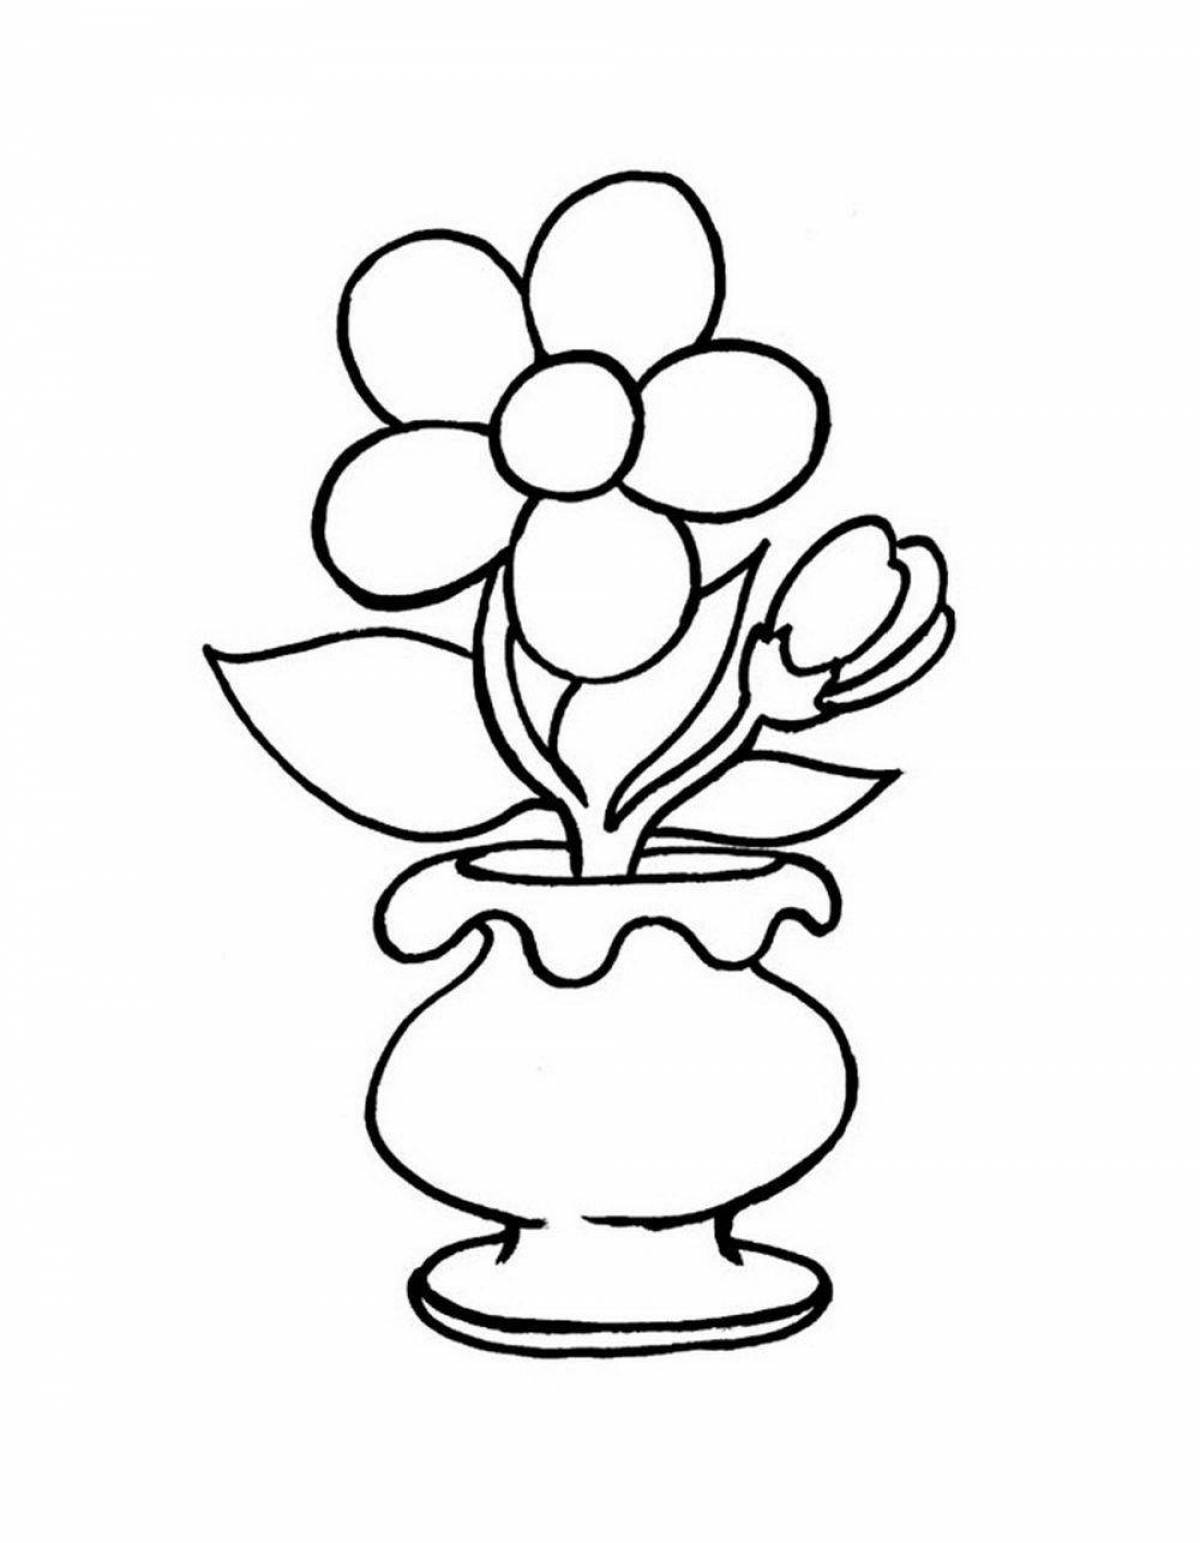 Bright vase with flowers for children 8-9 years old